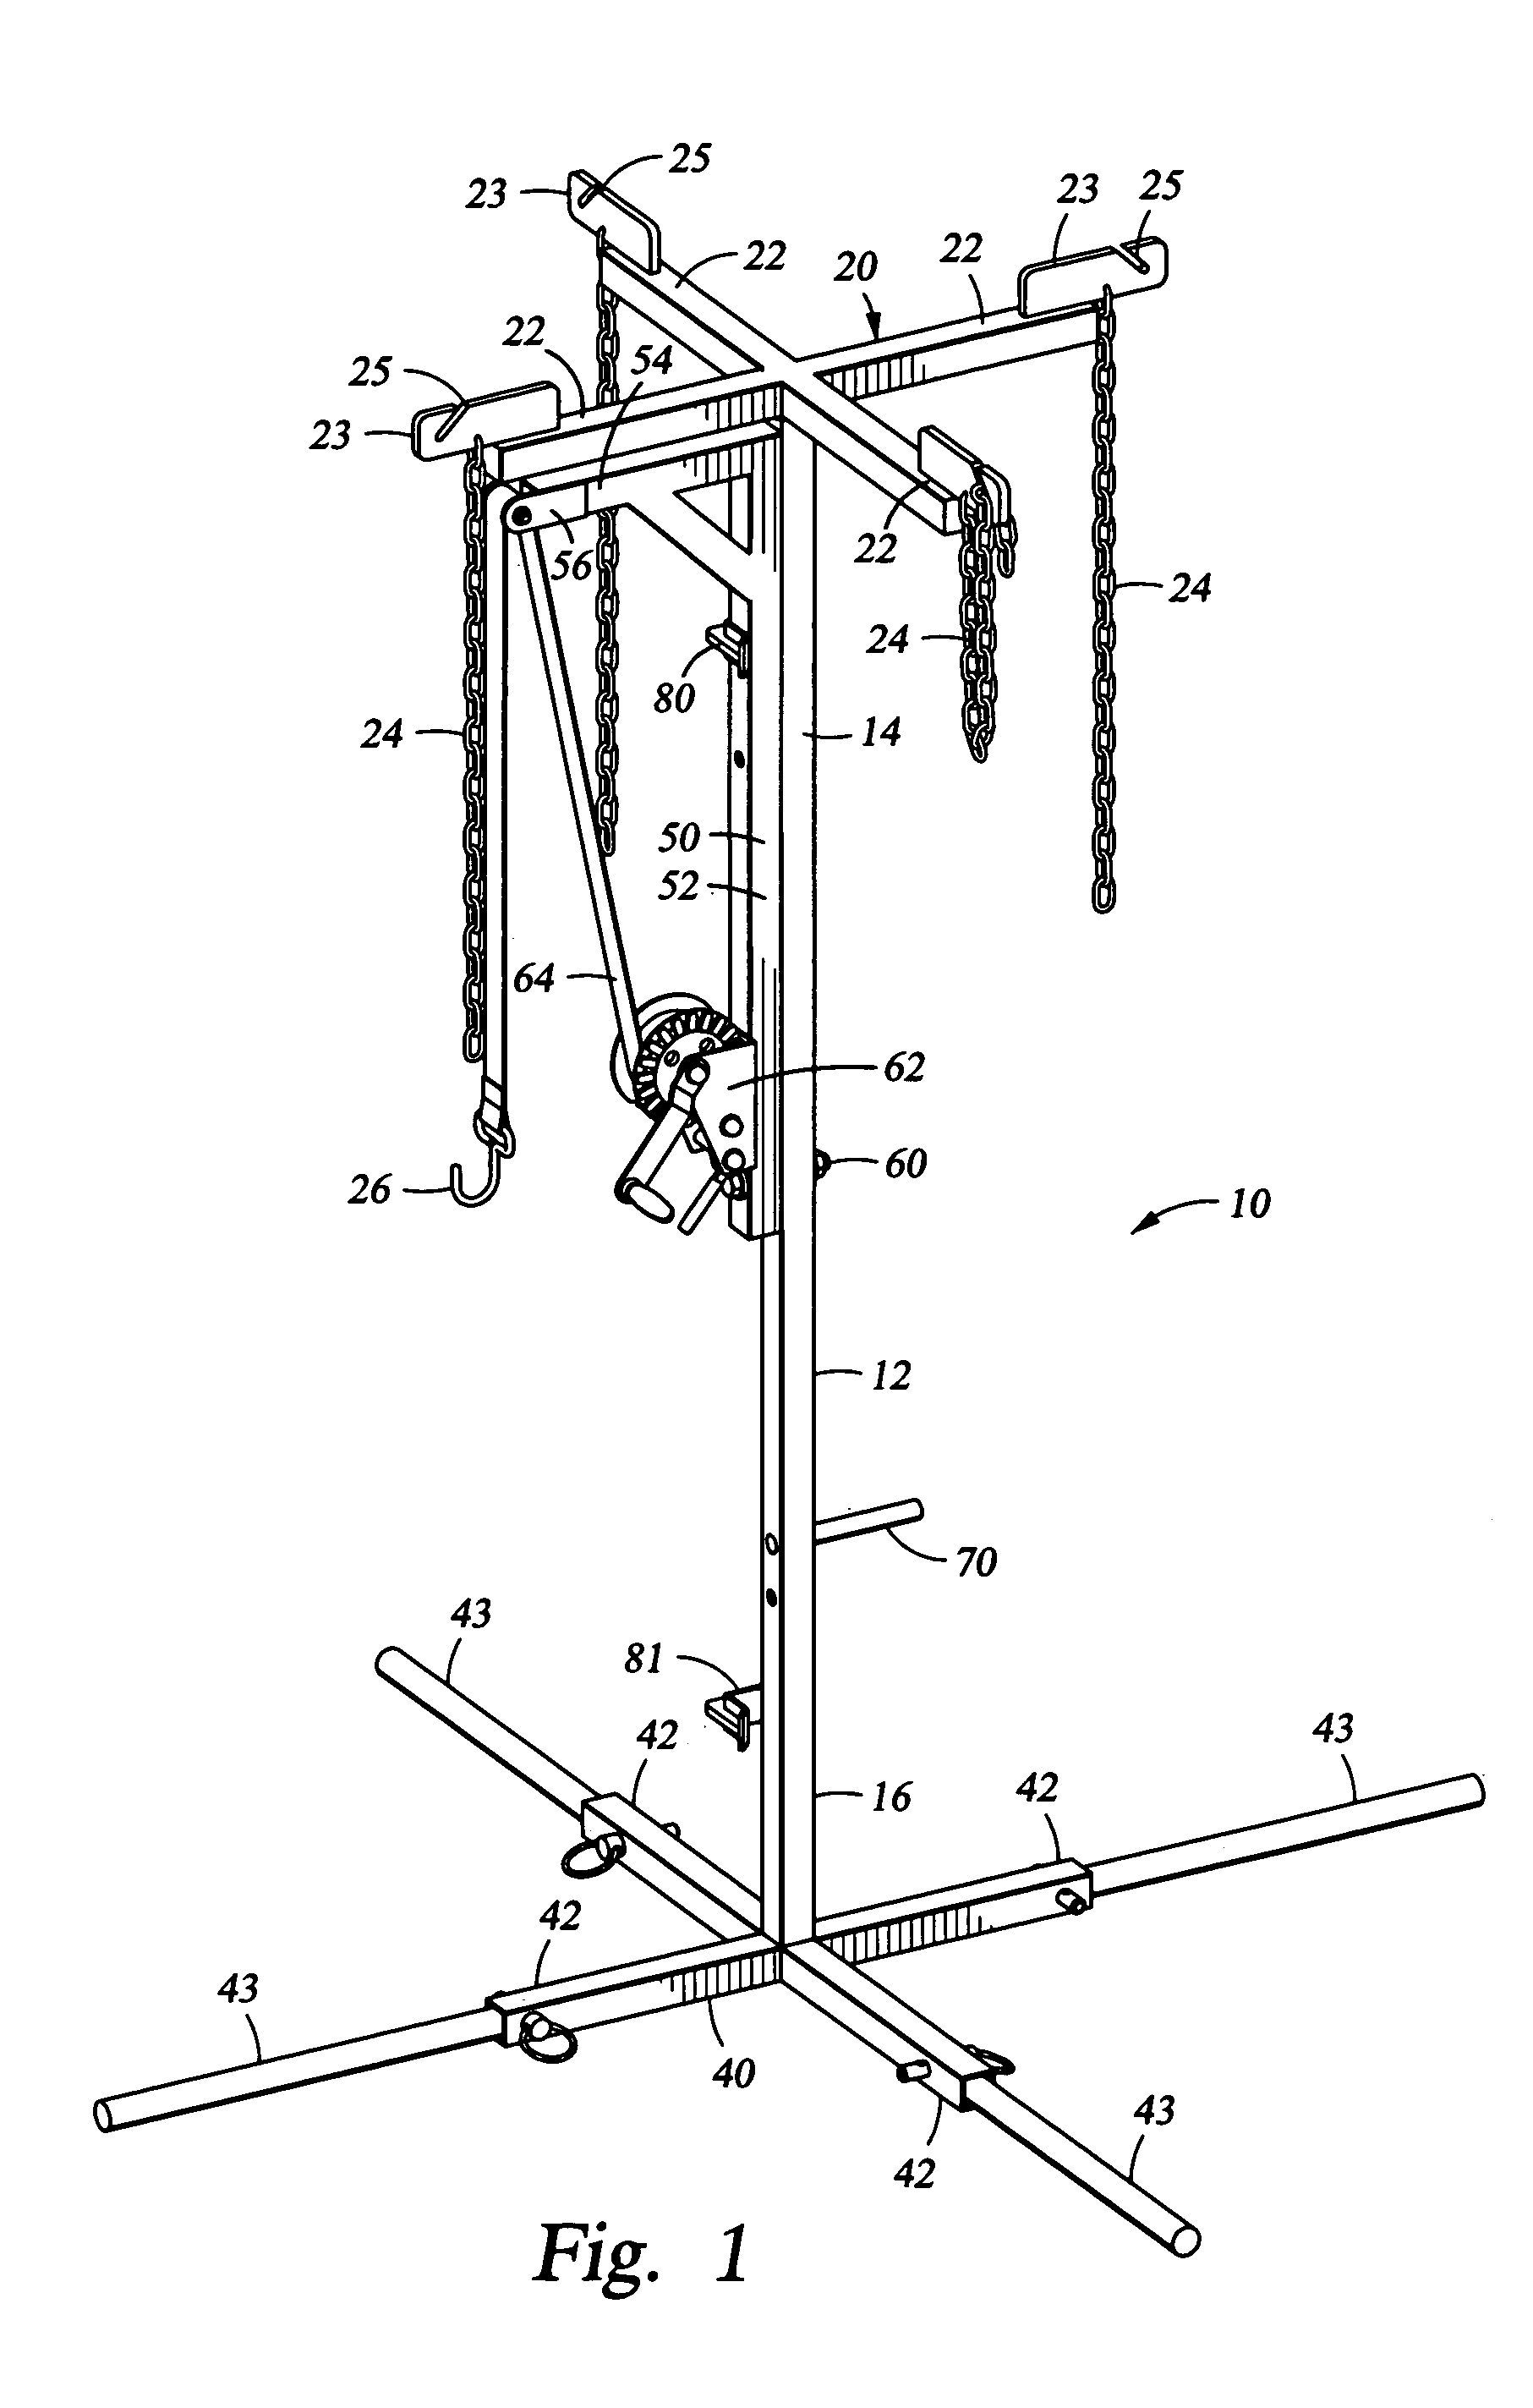 Portable game gallows for hoisting and skinning multiple game